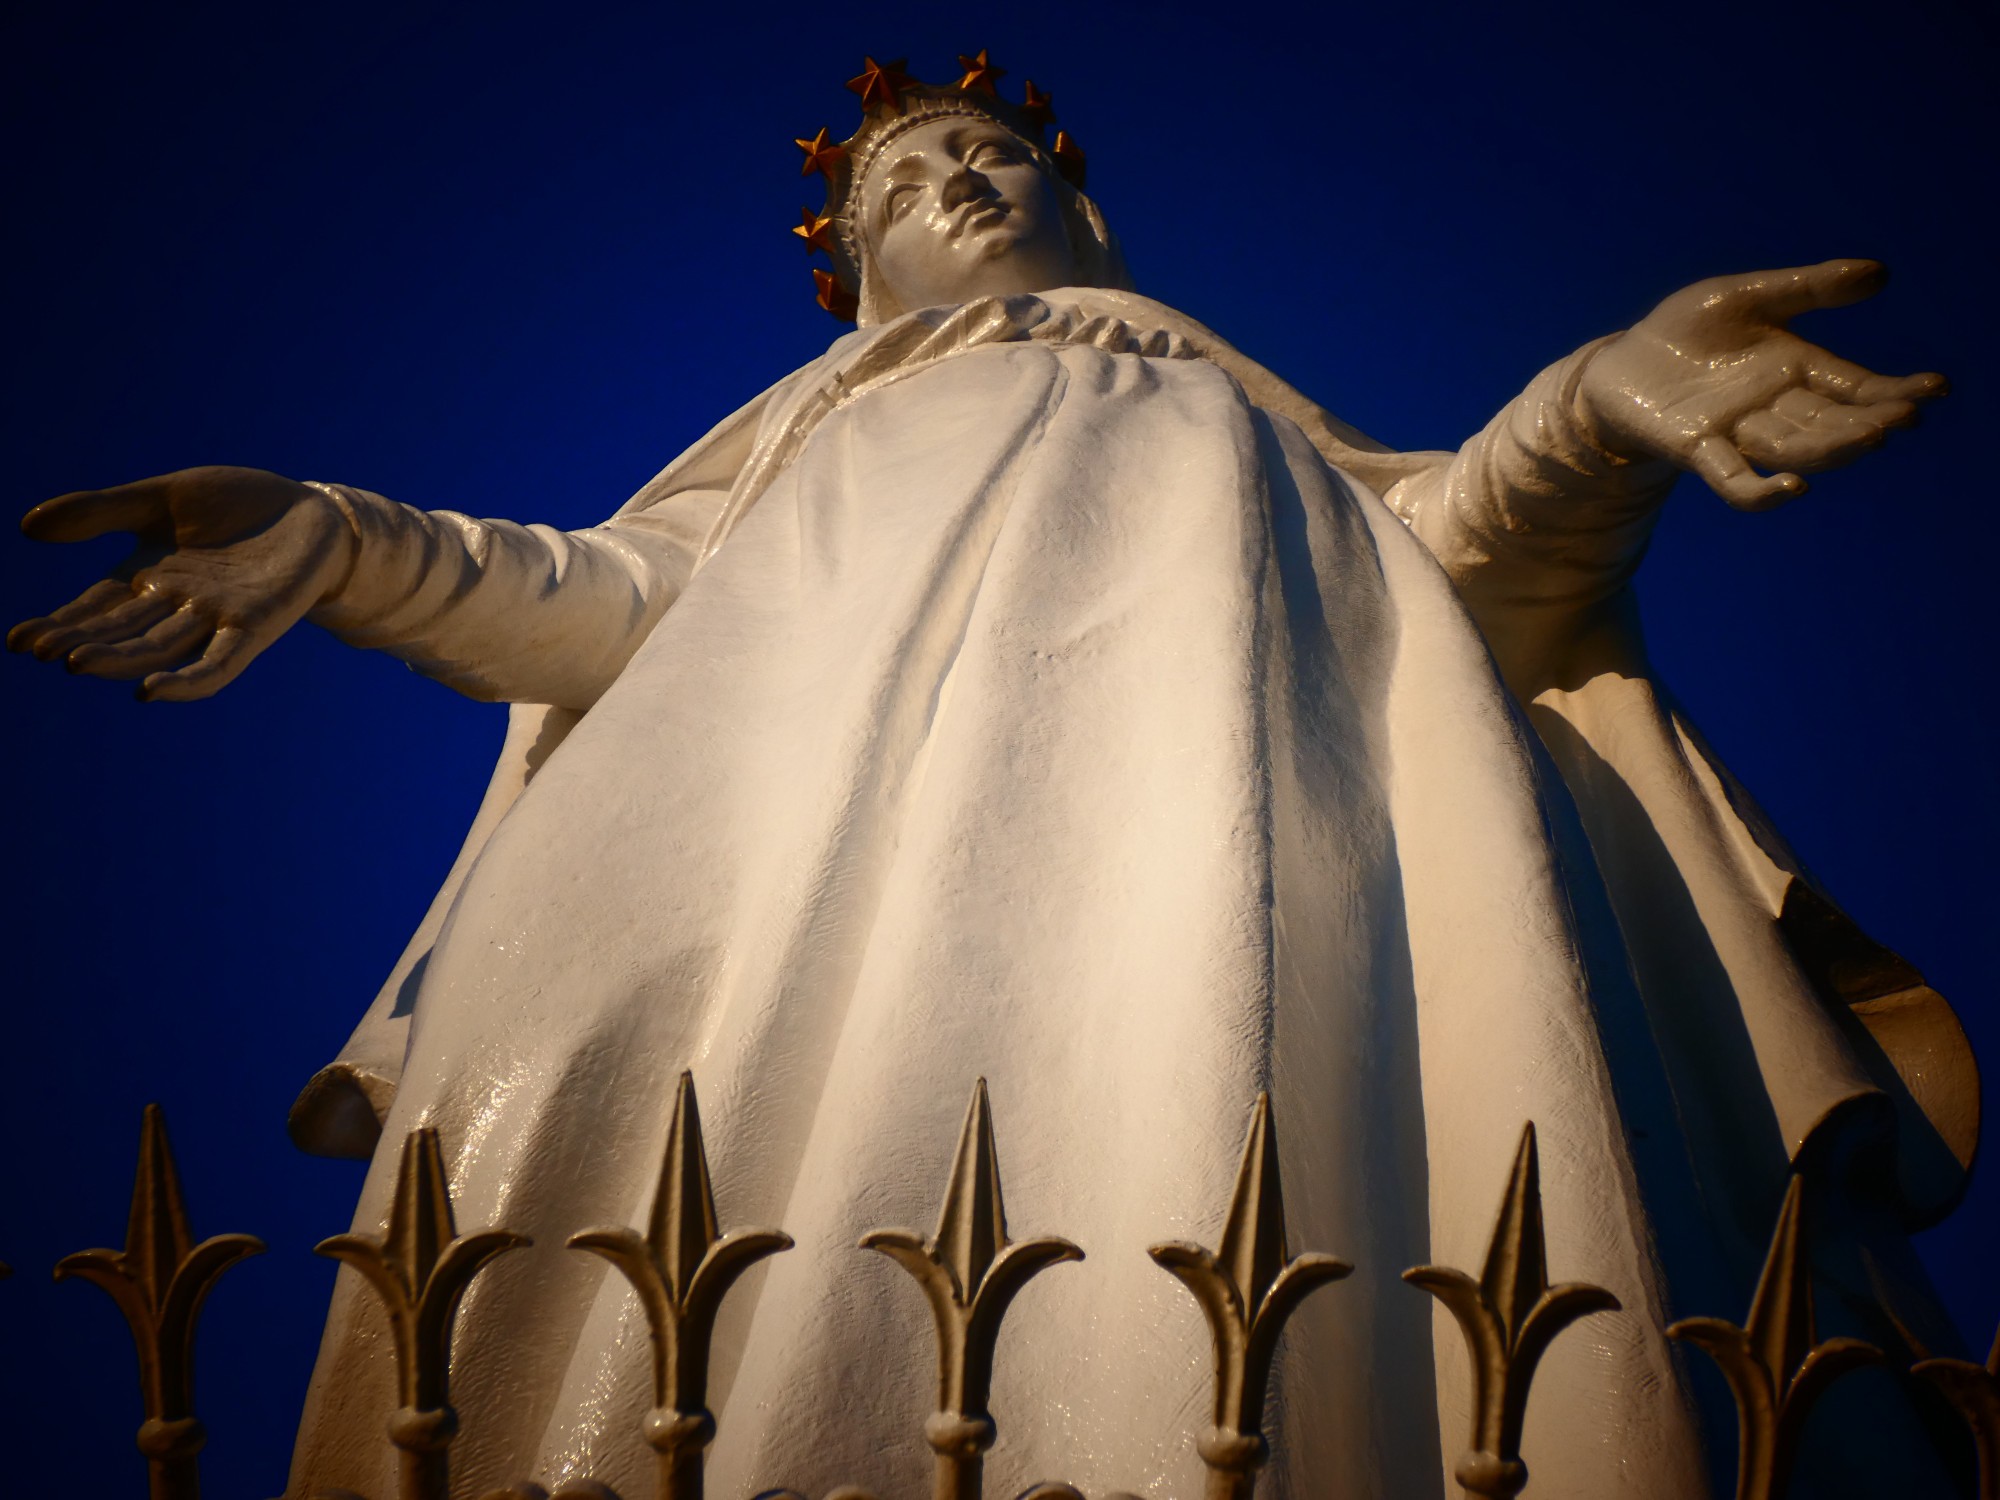 15-ton bronze statue in honor of Our Lady of Lebanon